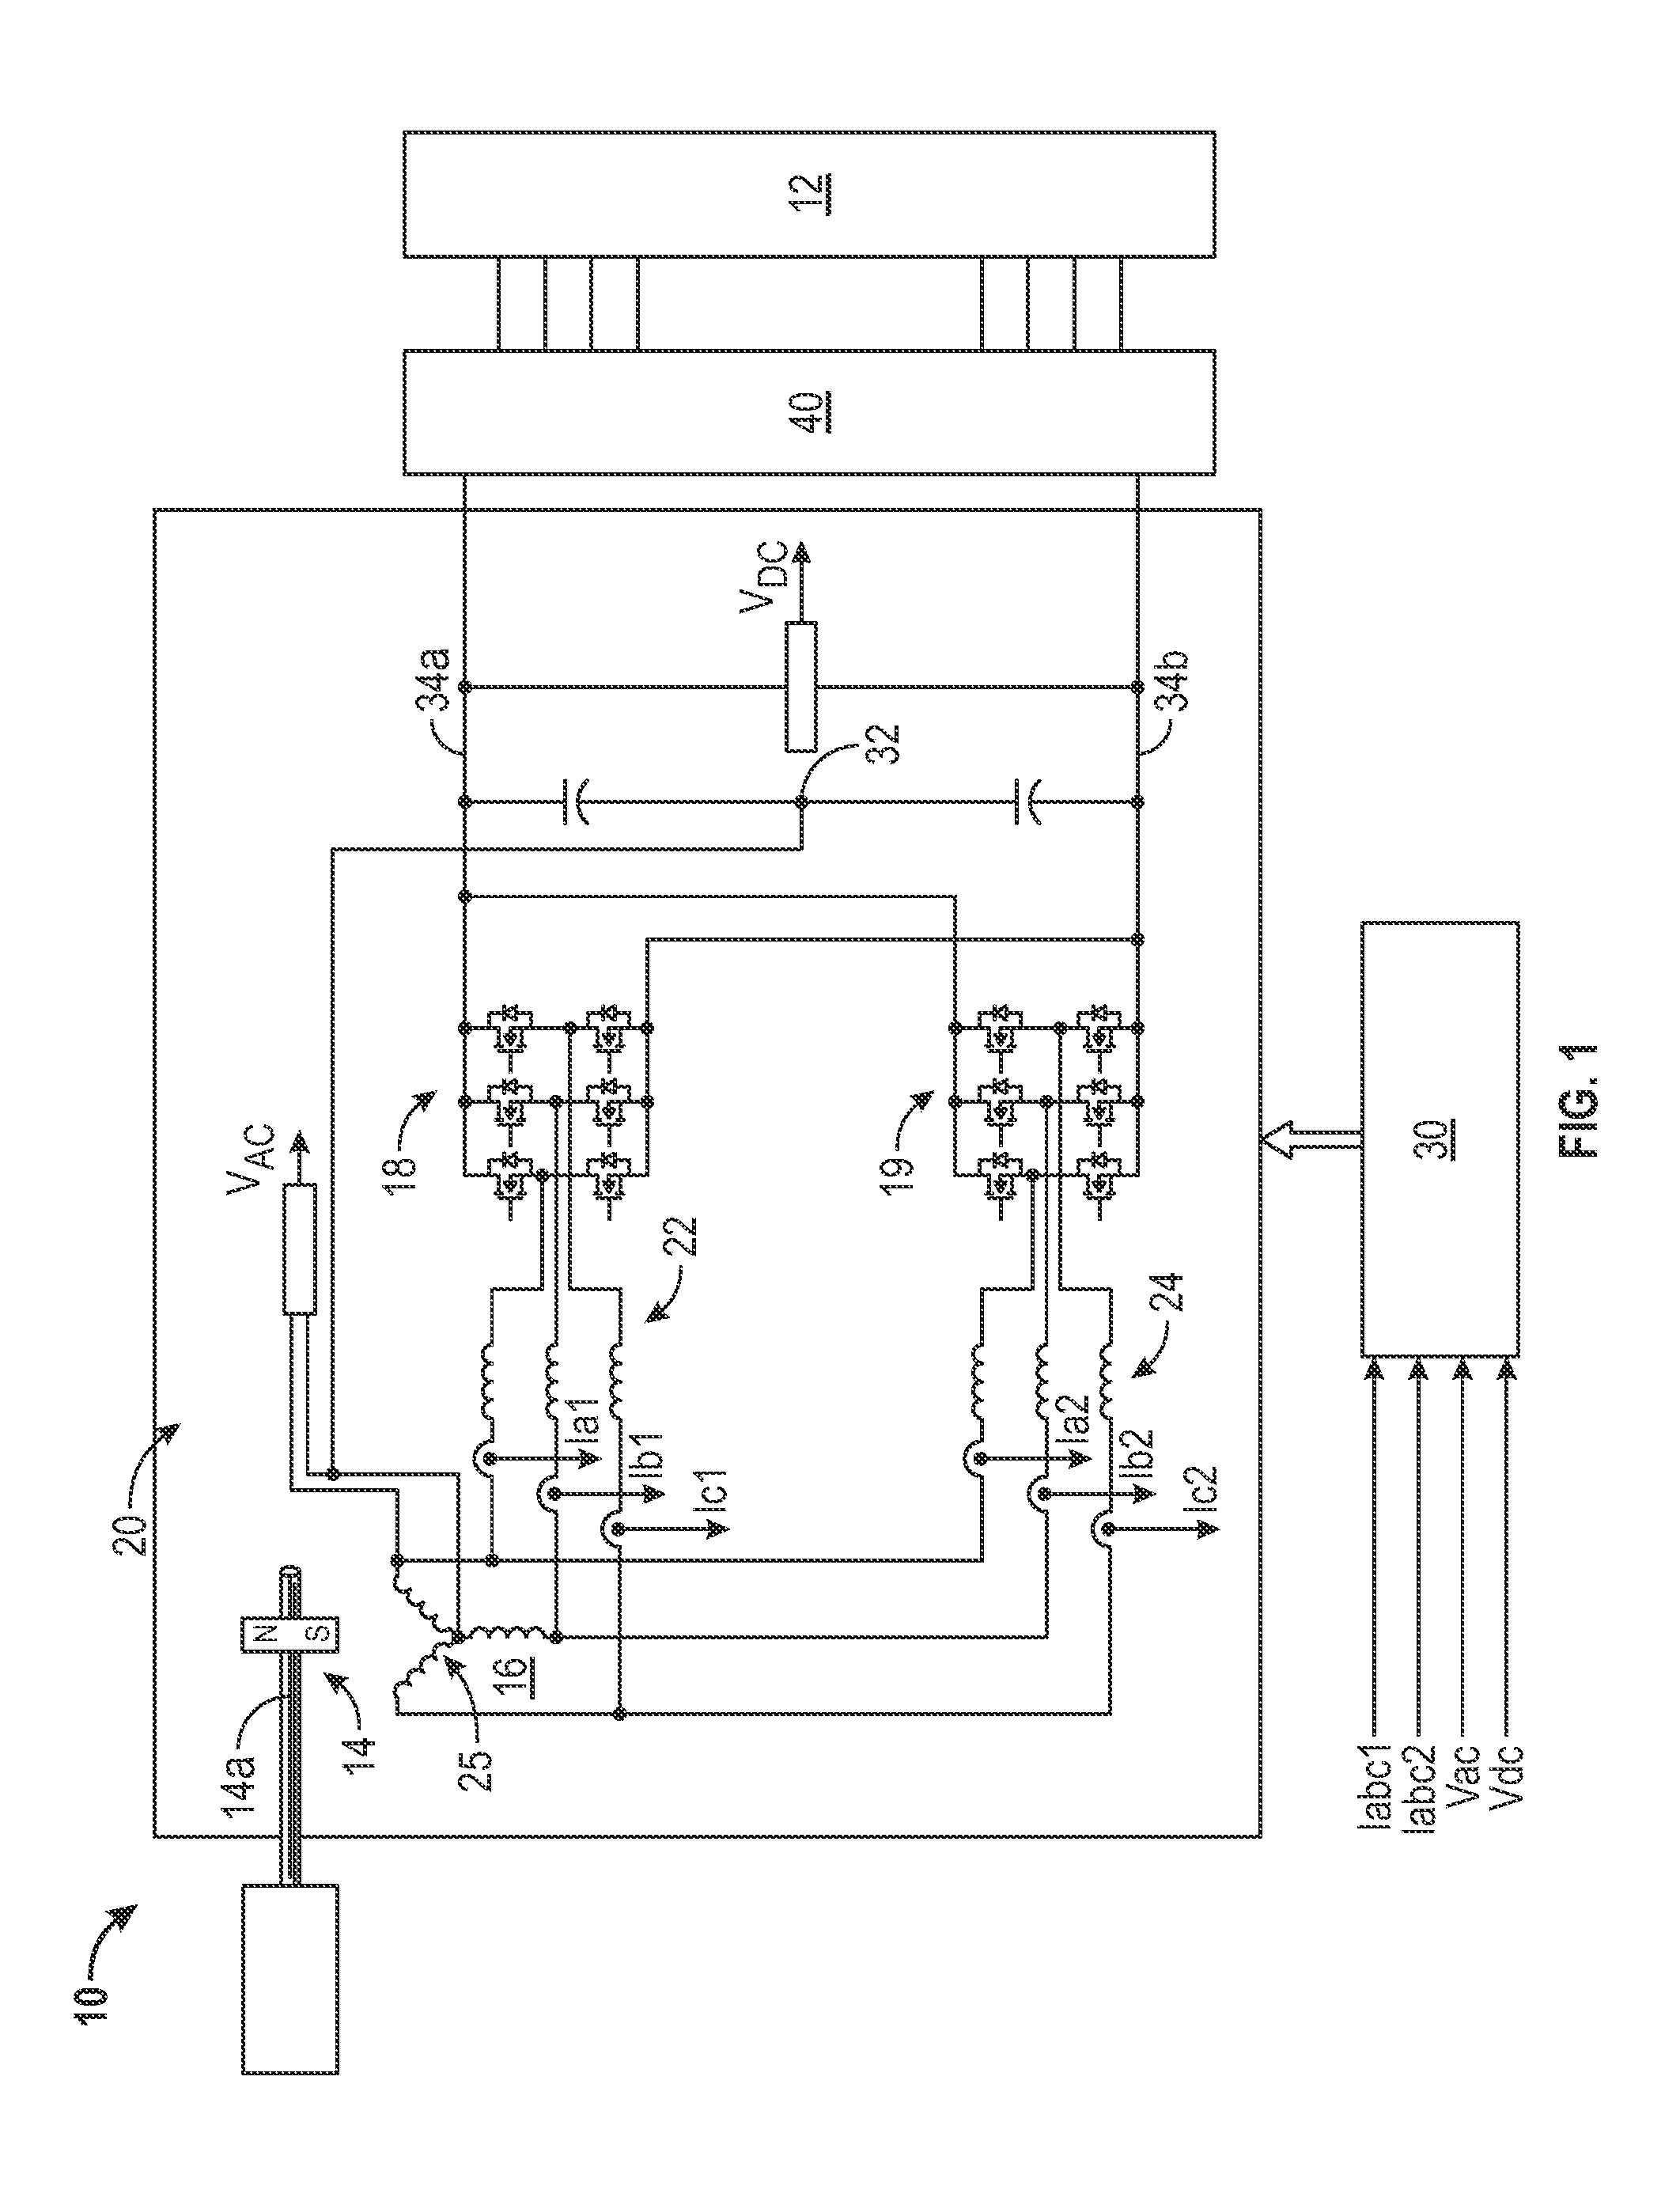 Integrated high-voltage direct current electric power generating system